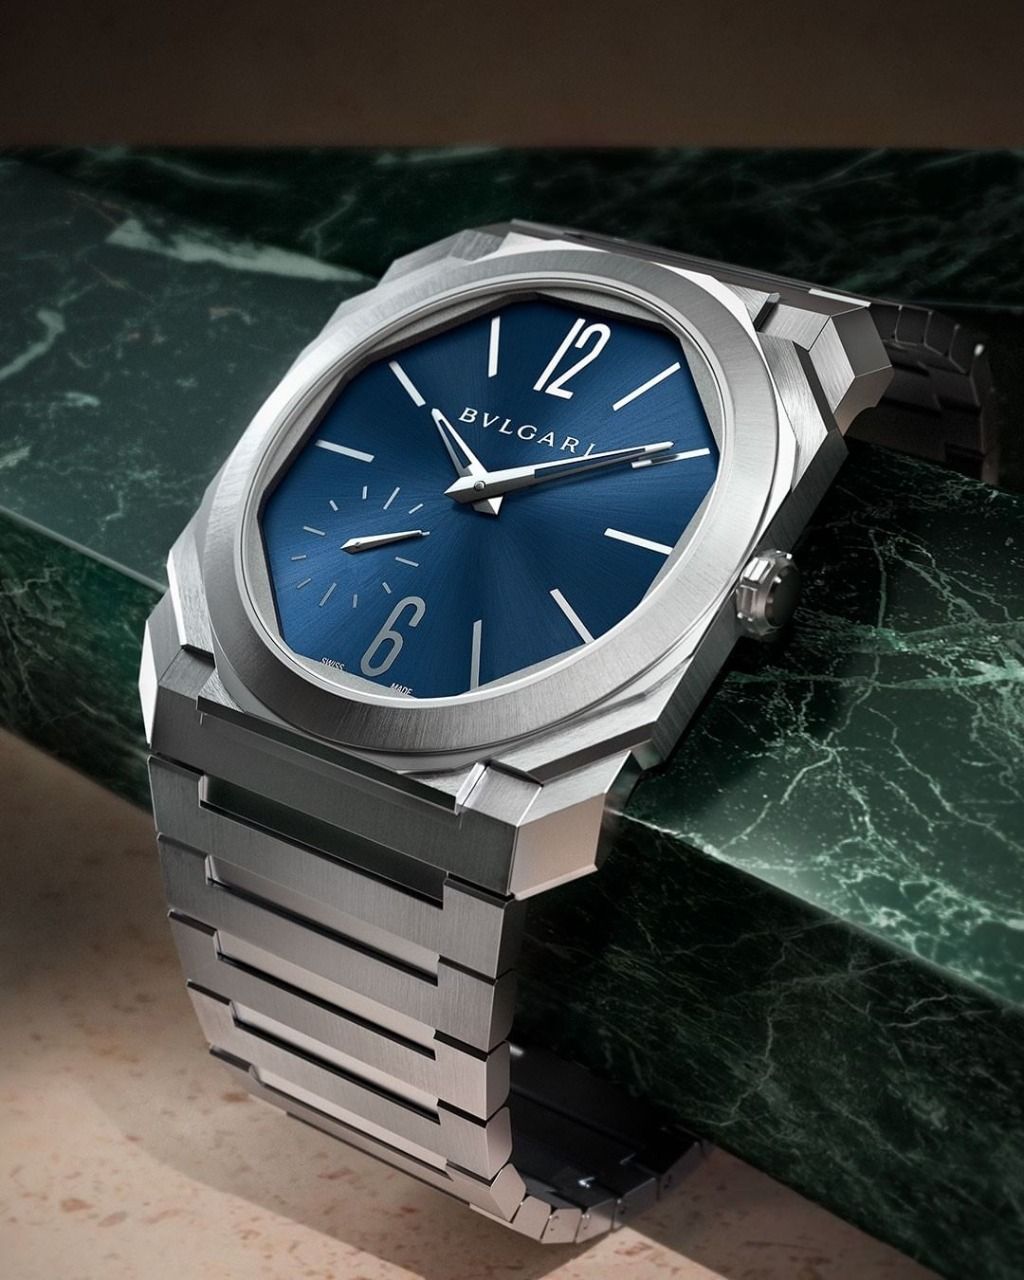 The Octo Finissimo Automatic in satin polished steel with blue dial with 100m depth rating